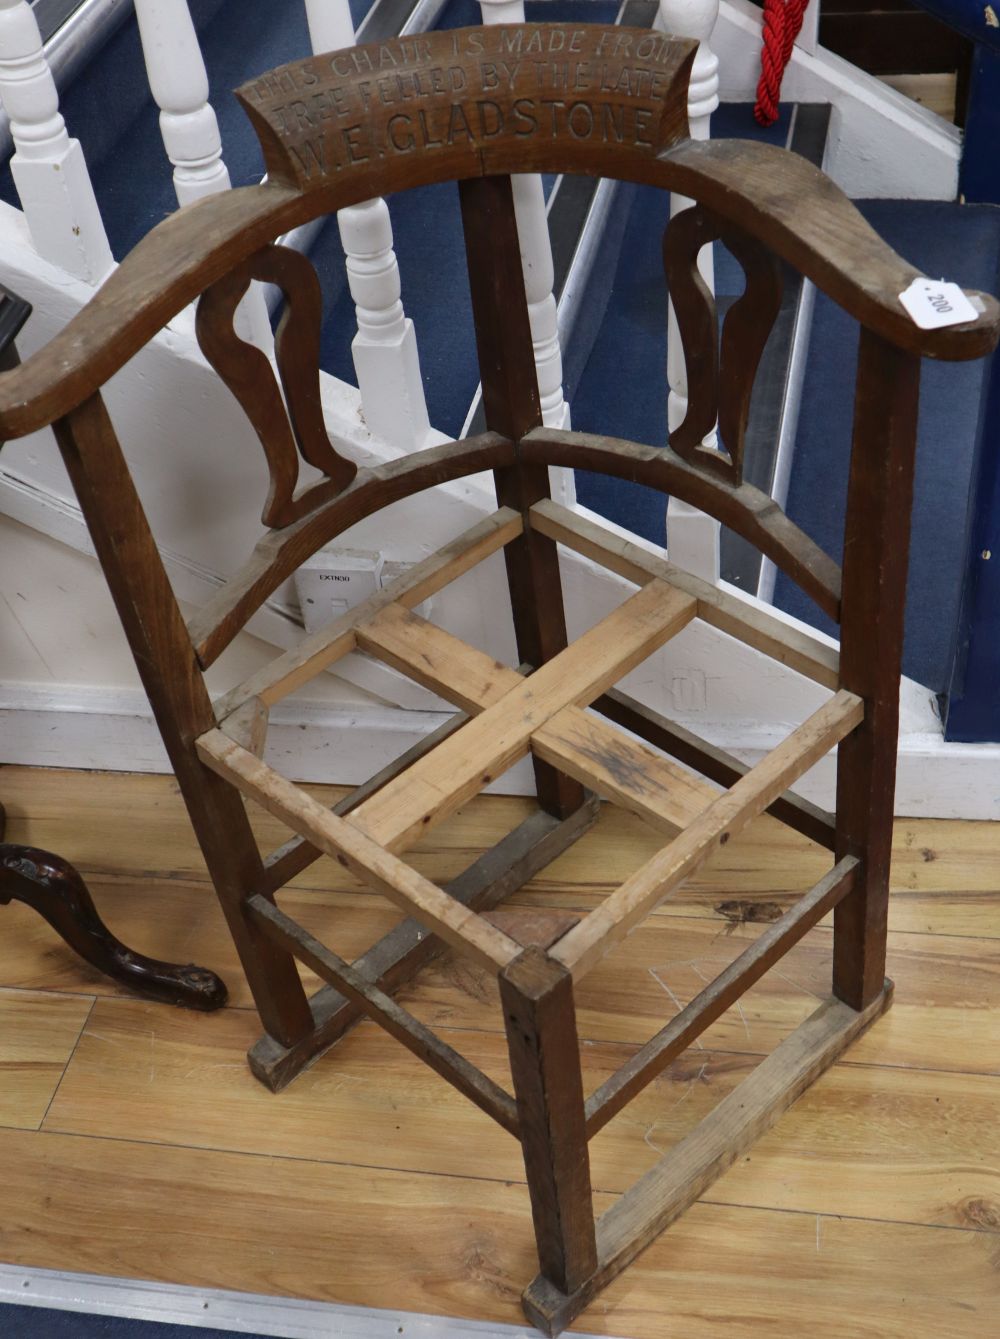 An early 20th century oak framed corner chair c.1900, inscribed This Chair is made from tree felled by the late W.E. Gladstone